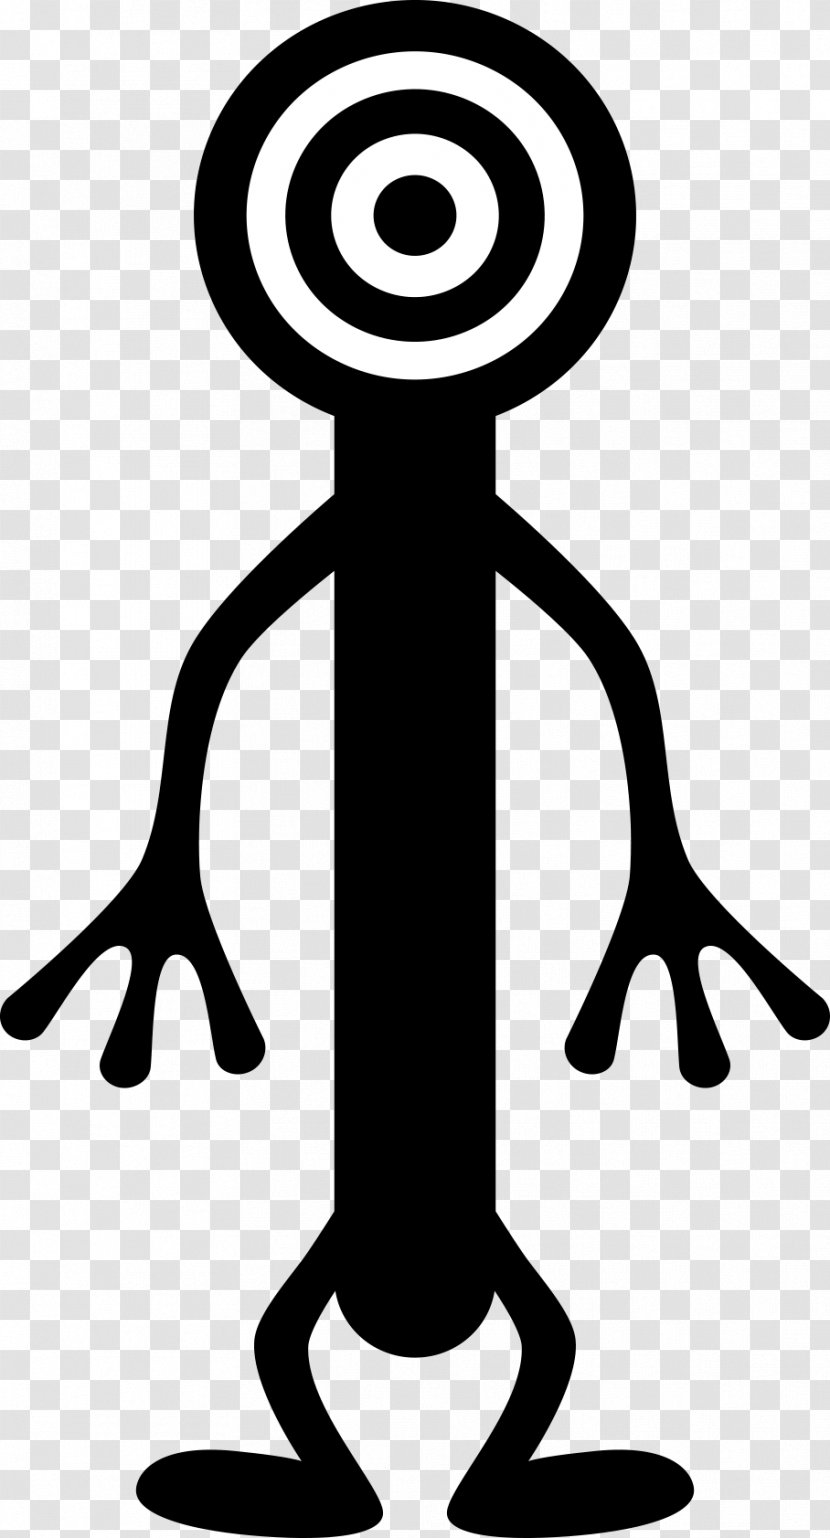 Black And White Monster Cartoon - Silhouette Transparent PNG